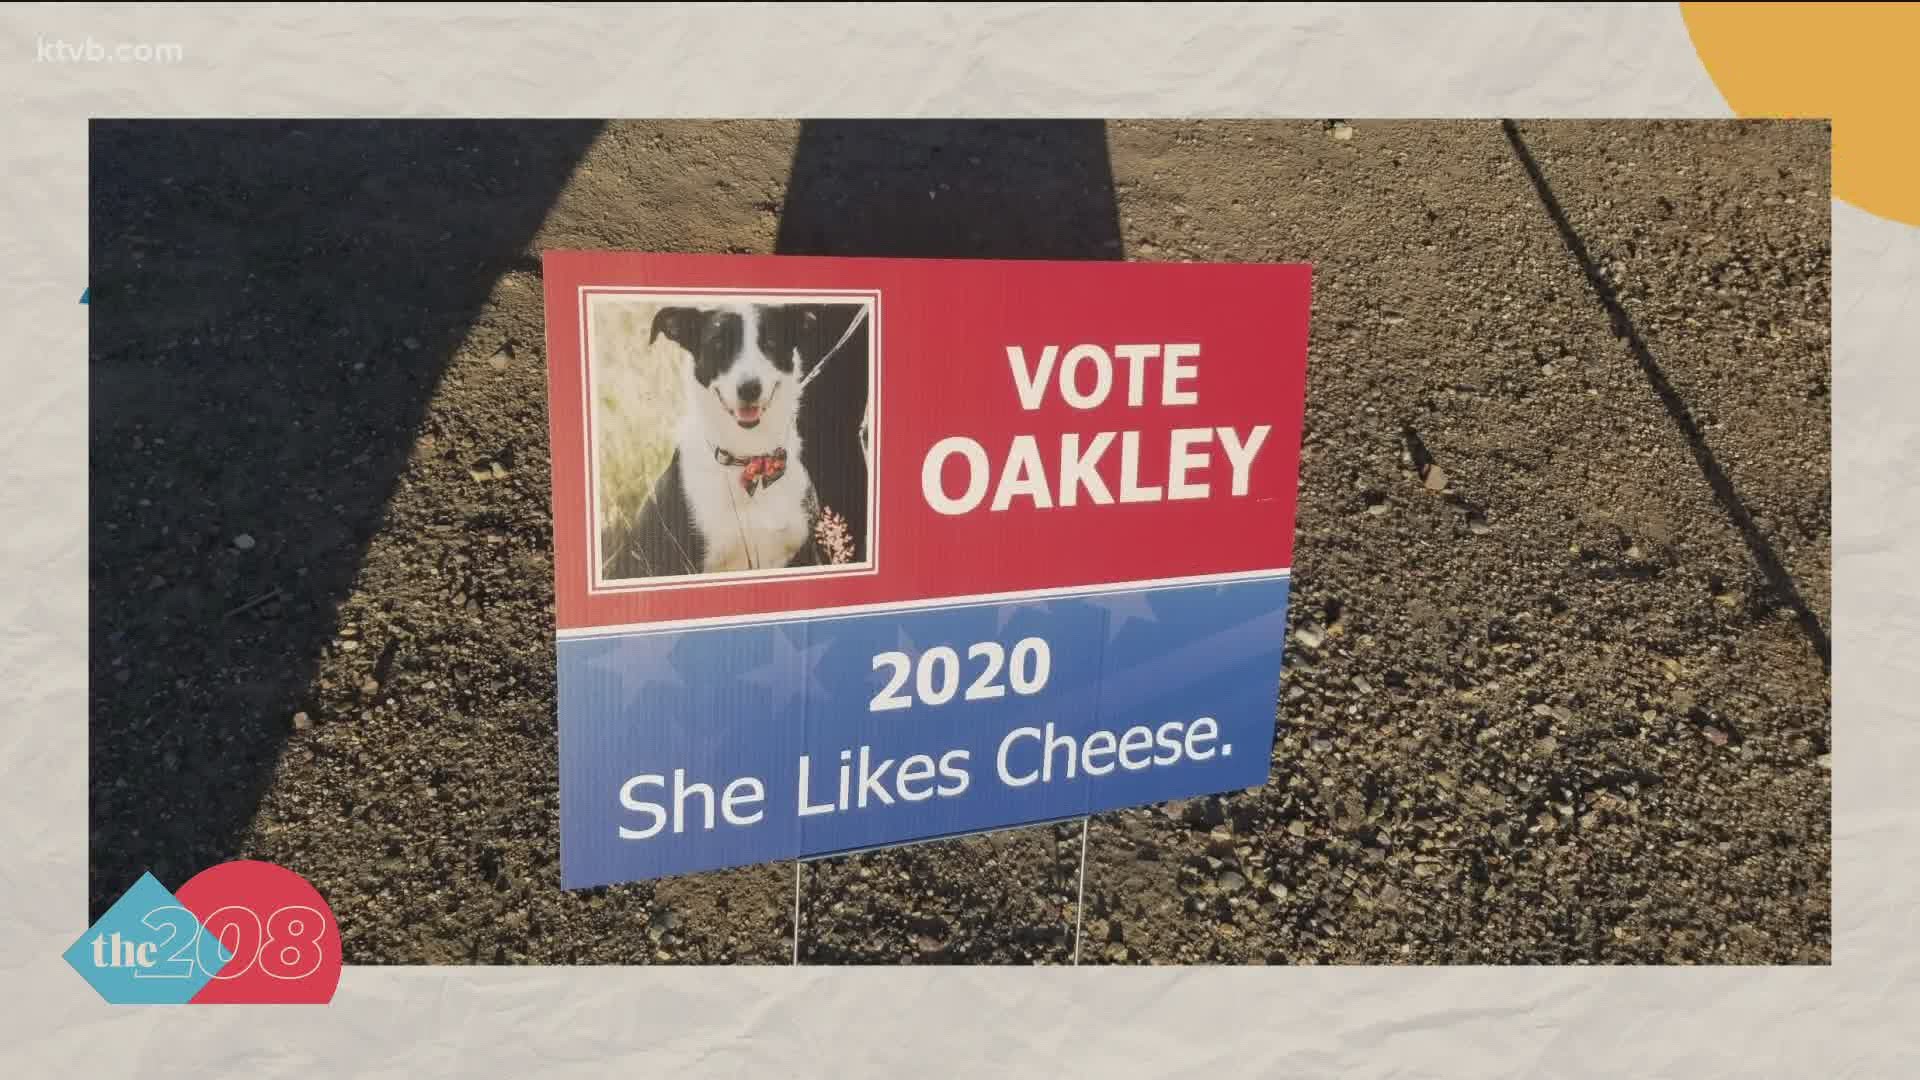 Oakley's platform consists of liking cheese, so against better judgement and the opinions of the cat lovers of the newsroom, The 208 is endorsing her for office.